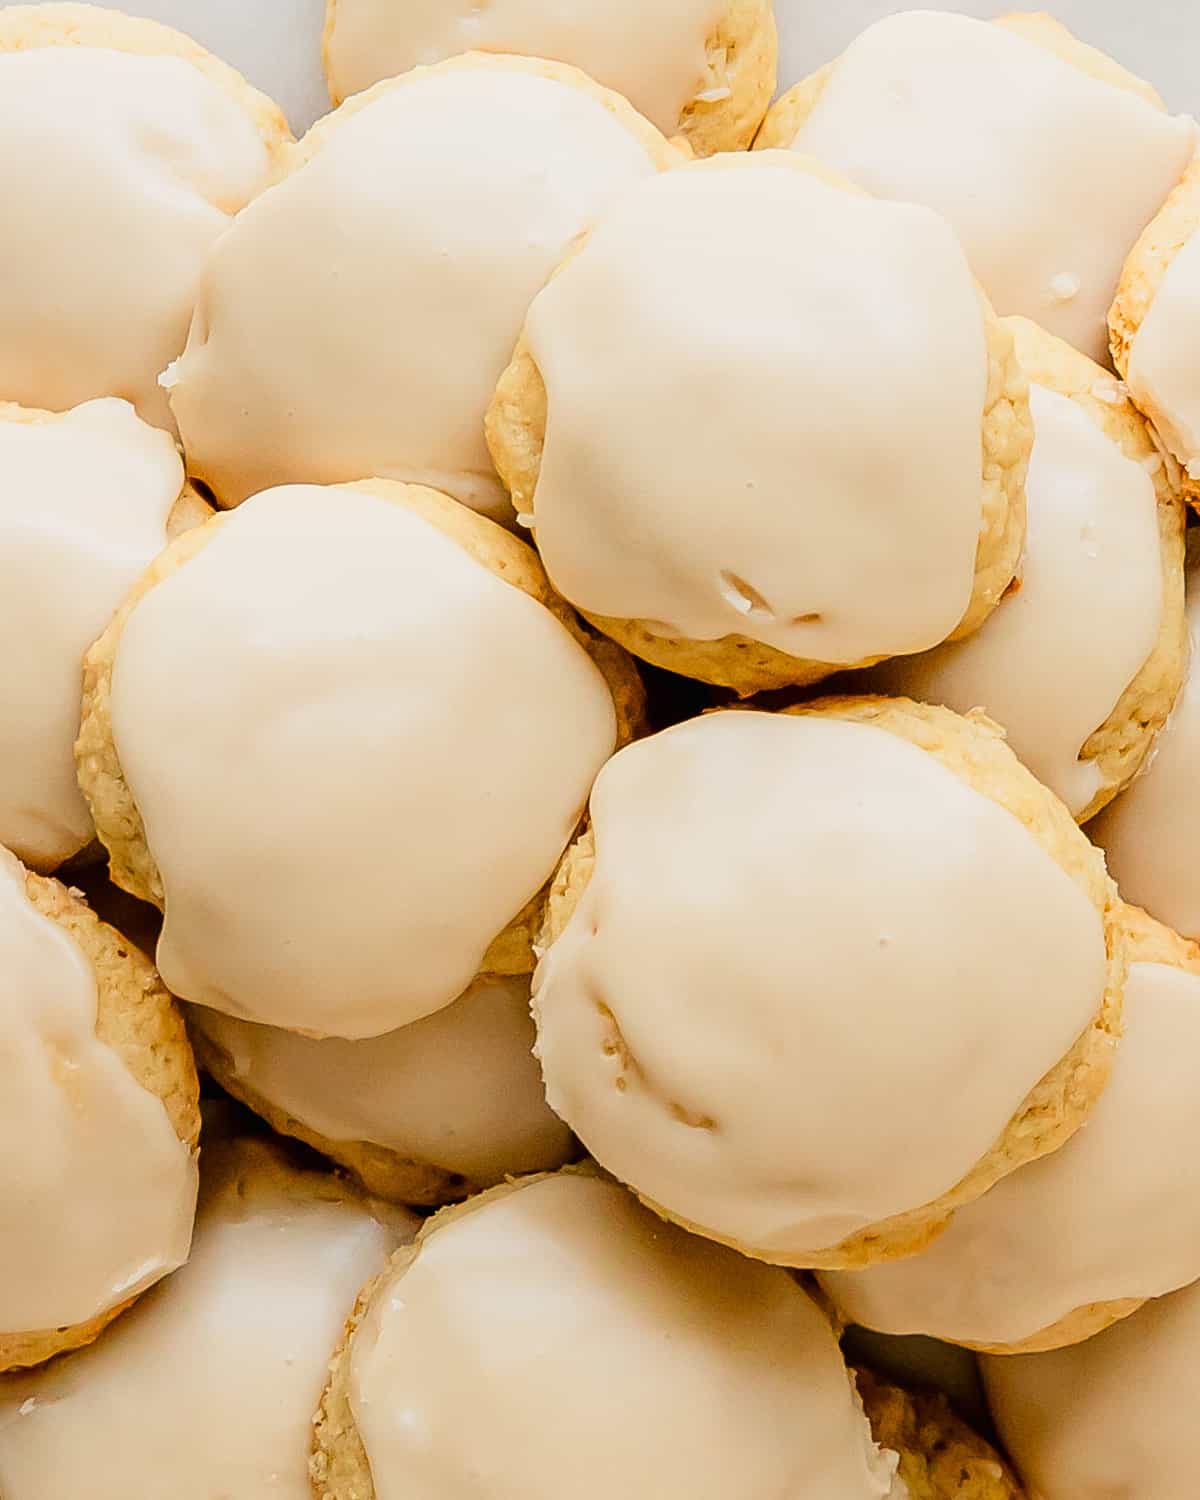 Buttermilk cookies are soft vanilla cookies with a tender, cakey crumb. Also known as Amish cookies, these buttermilk sugar cookies are topped with a sweet and slightly tangy buttermilk glaze.  